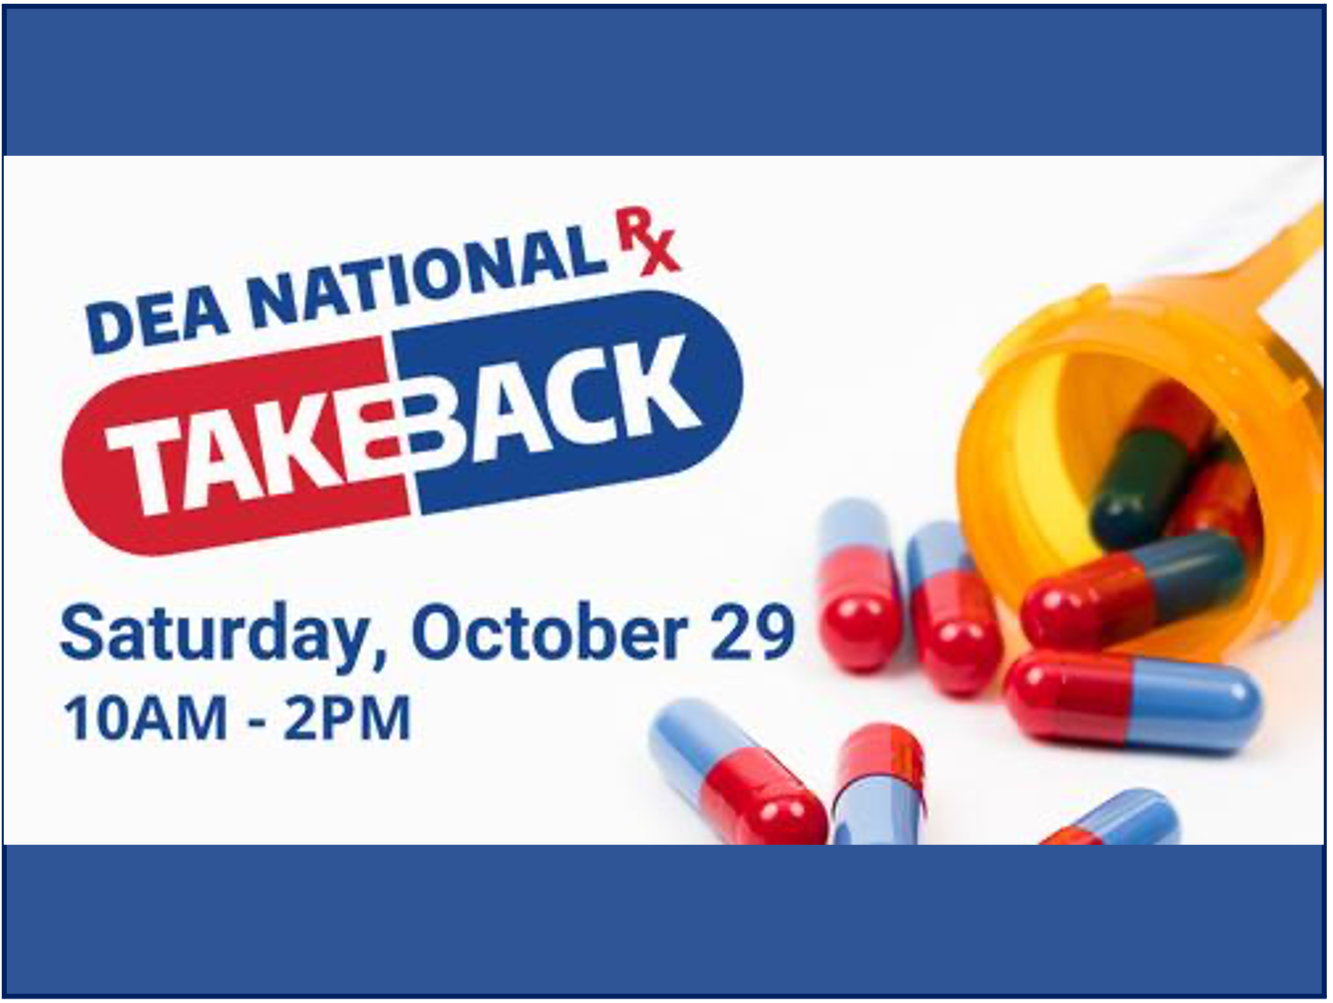 DEA National RX Takeback Day